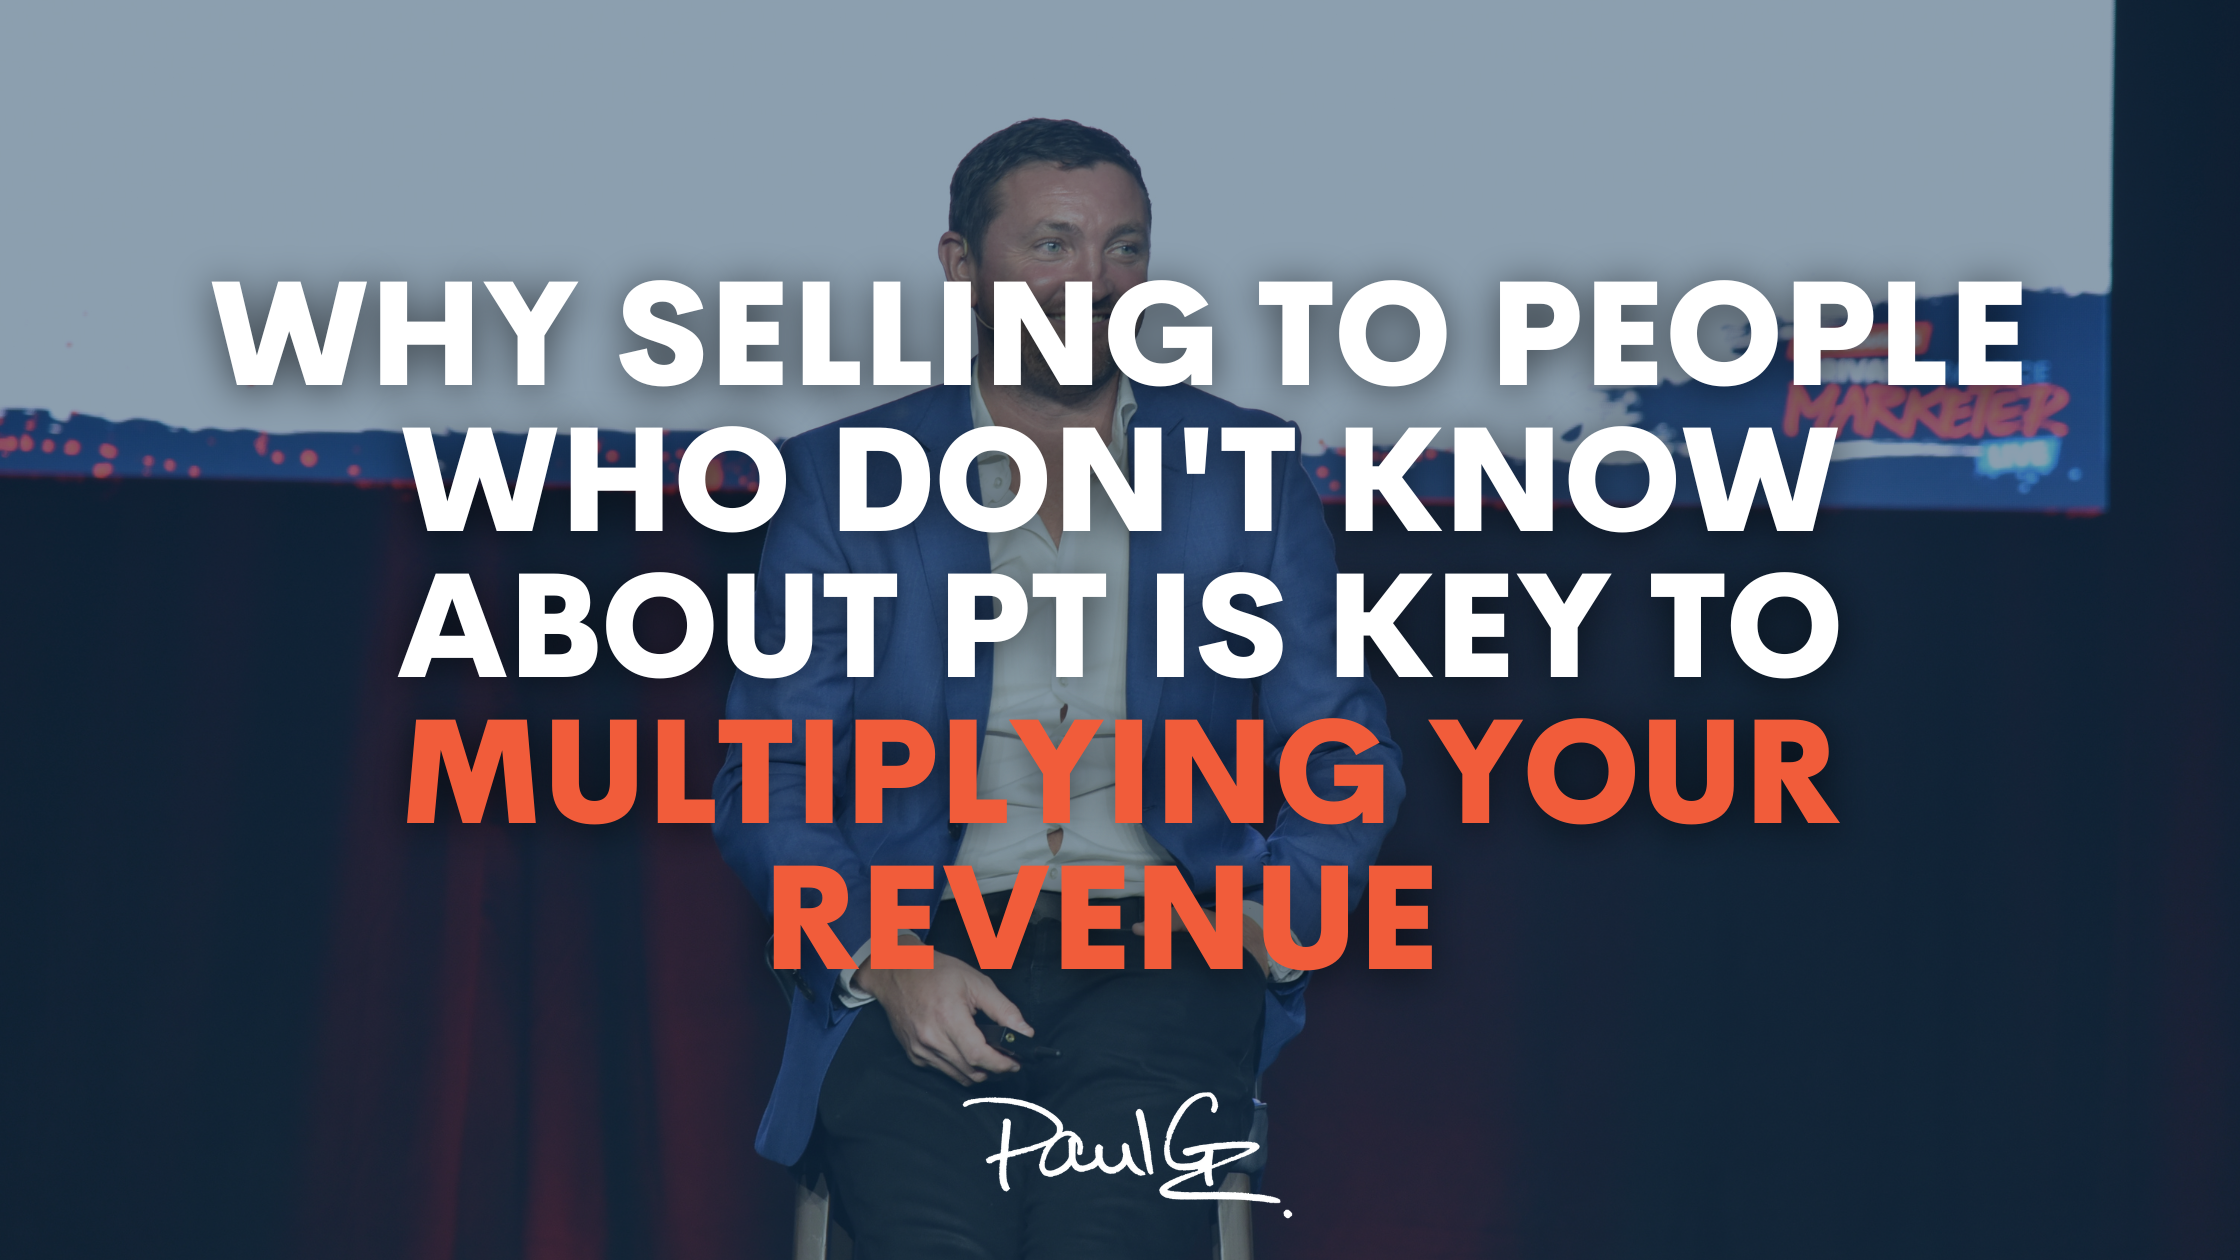 Why Selling to People Who Don’t Know About PT Is Key to Multiplying Your Revenue